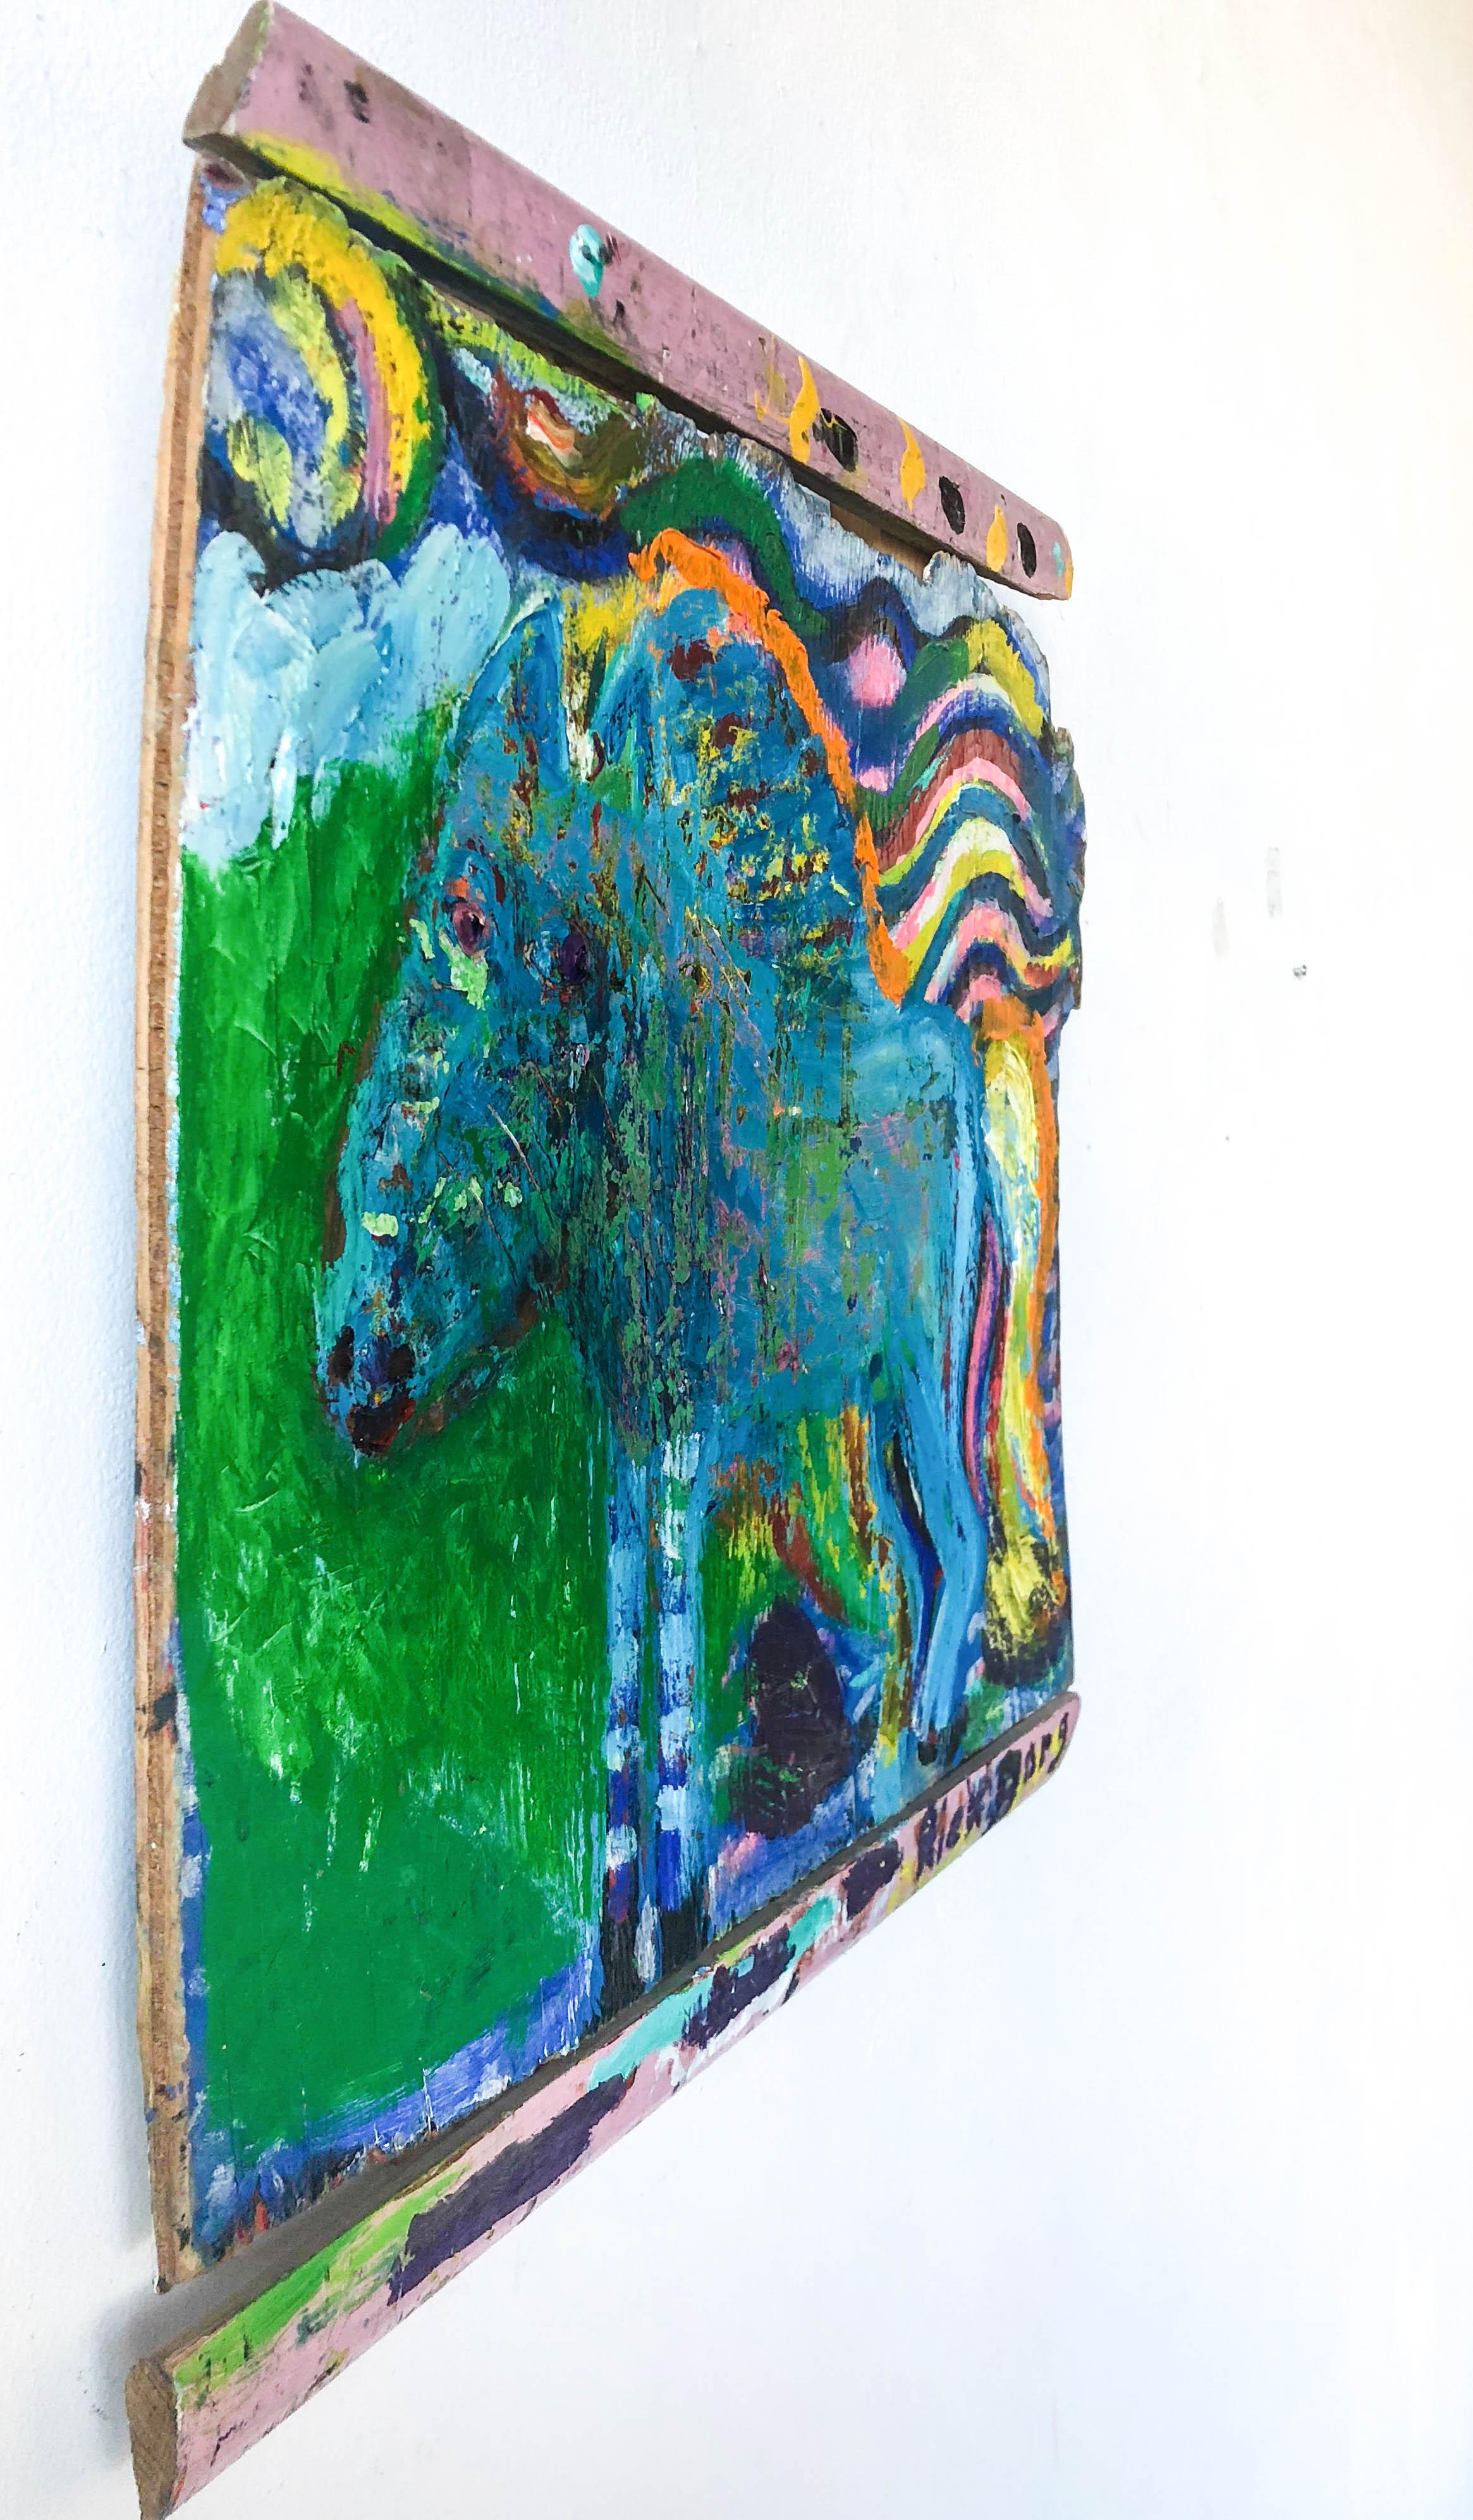 Blue Sparkly Horse on Found Wood//Folk Art - Painting by Rick Borg